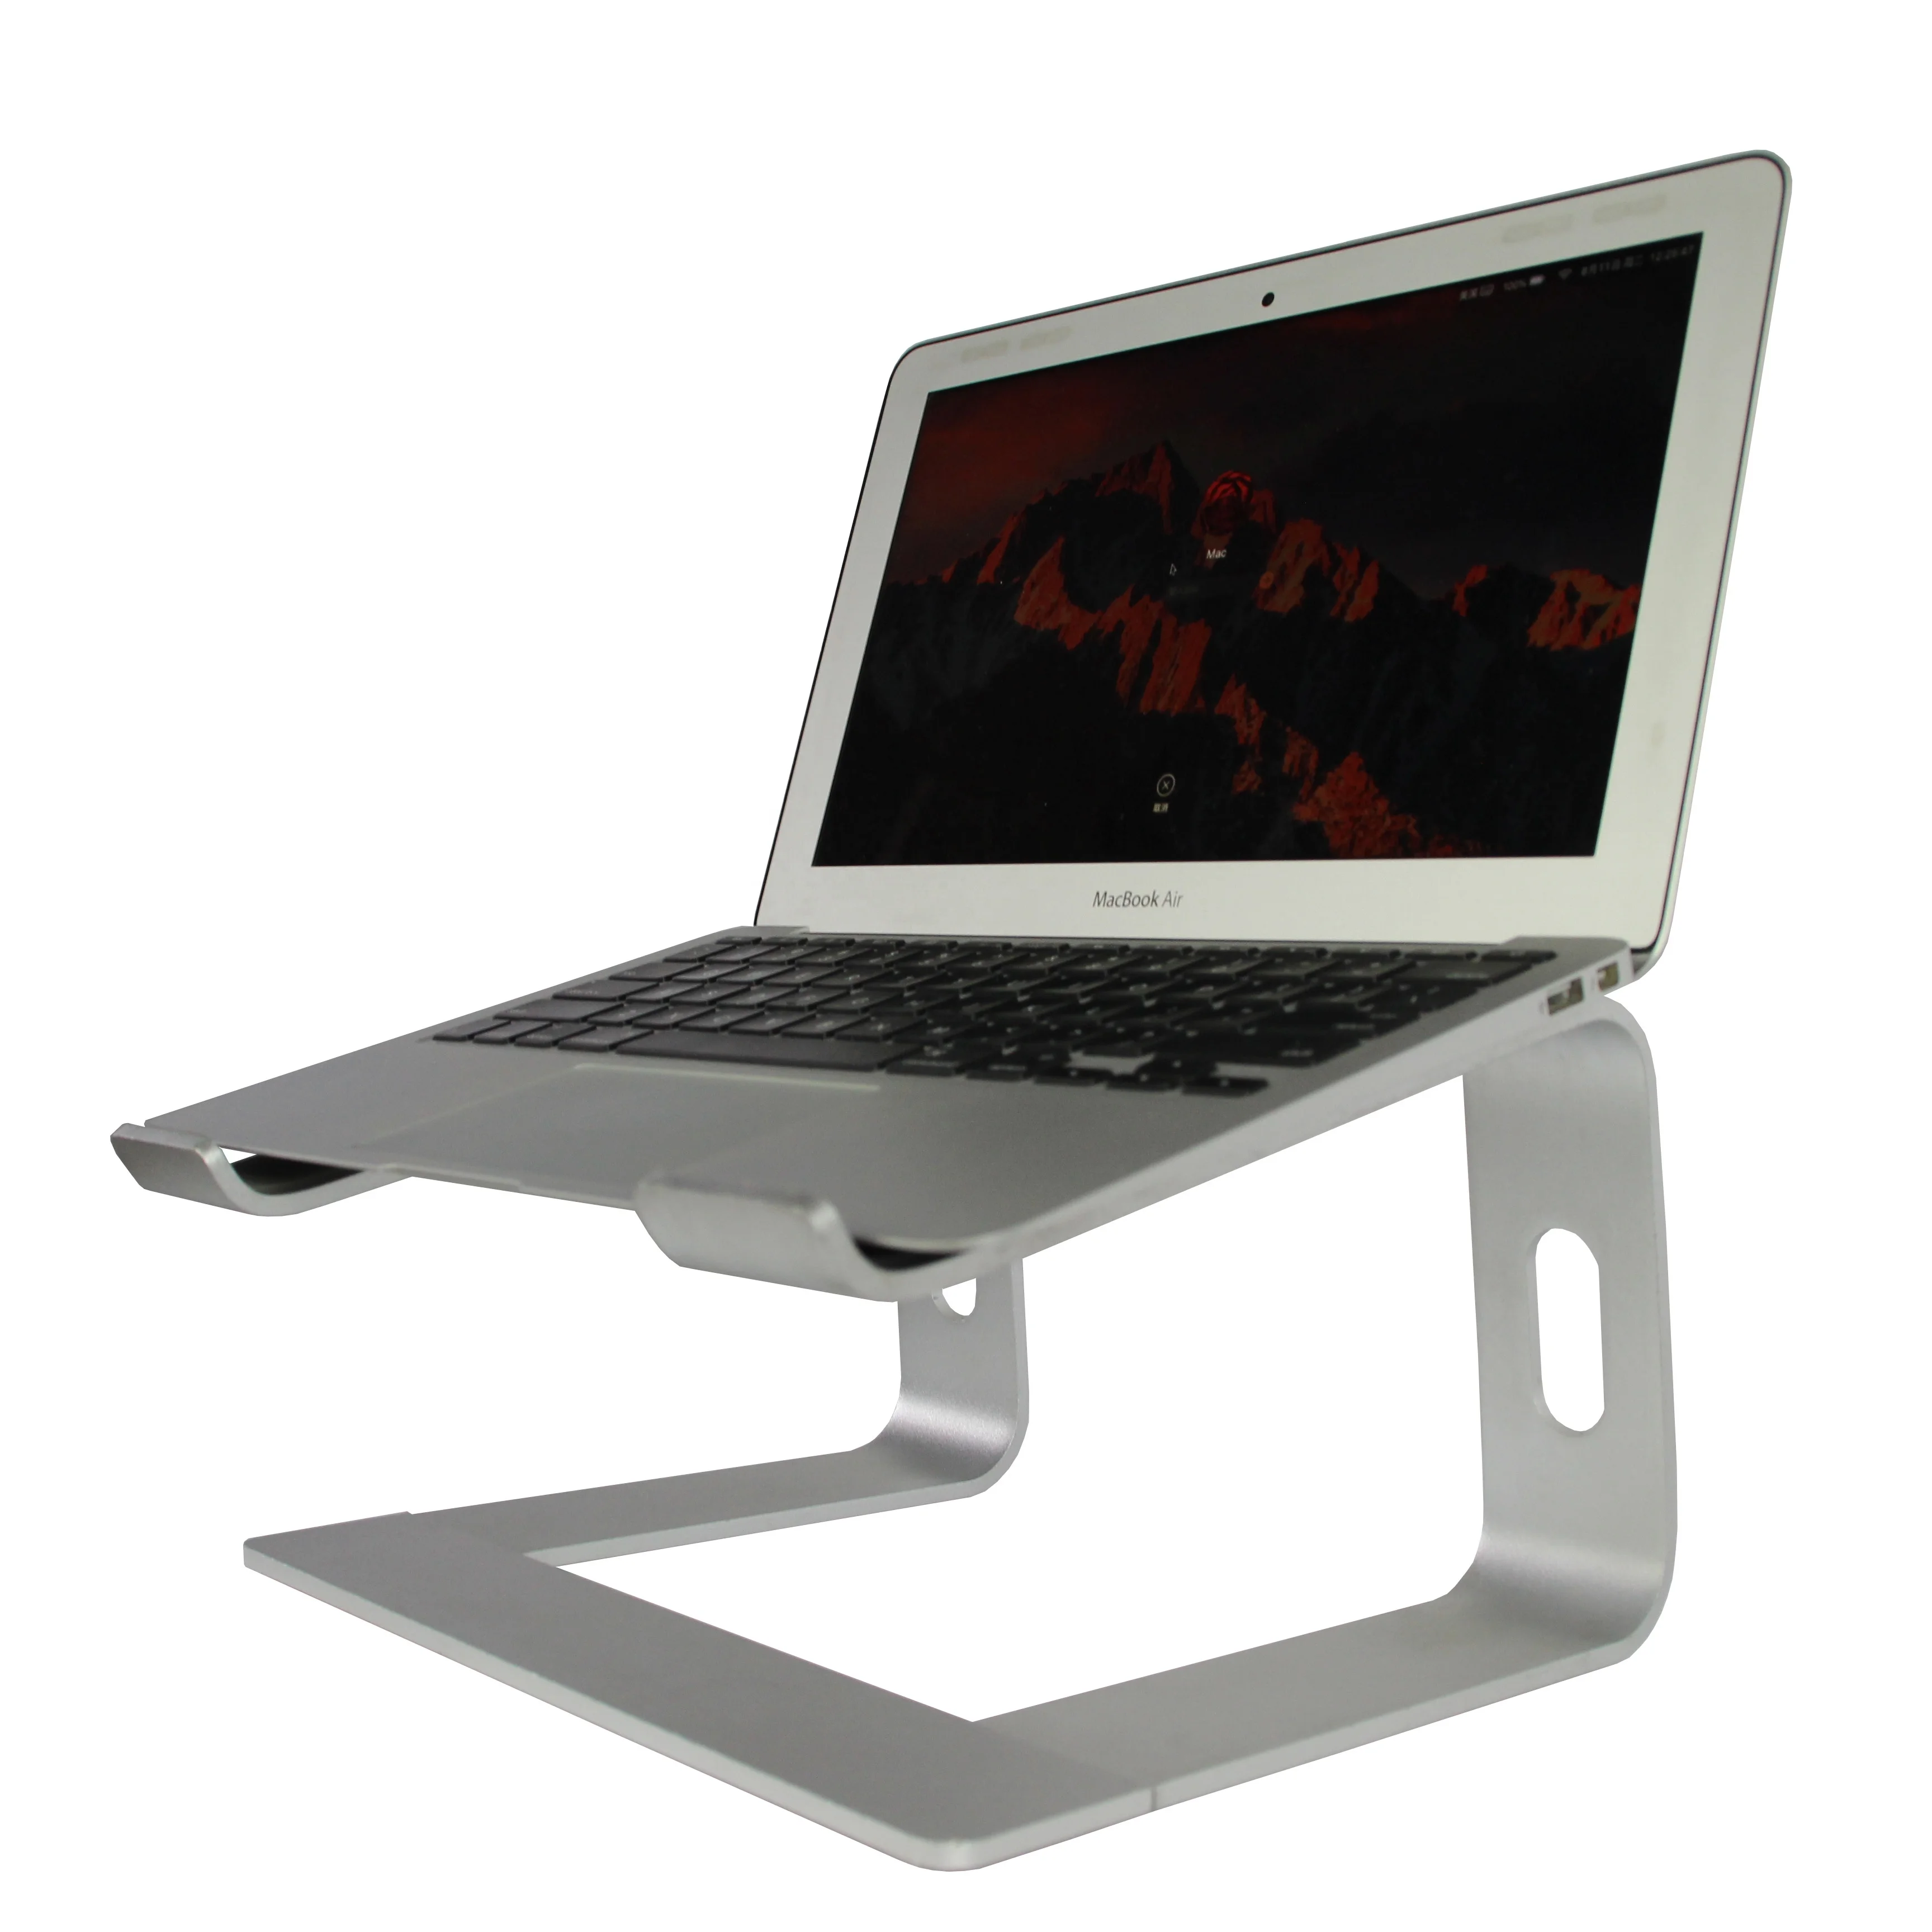 
Silver style high quality portable aluminum laptop computer table stand for bed 